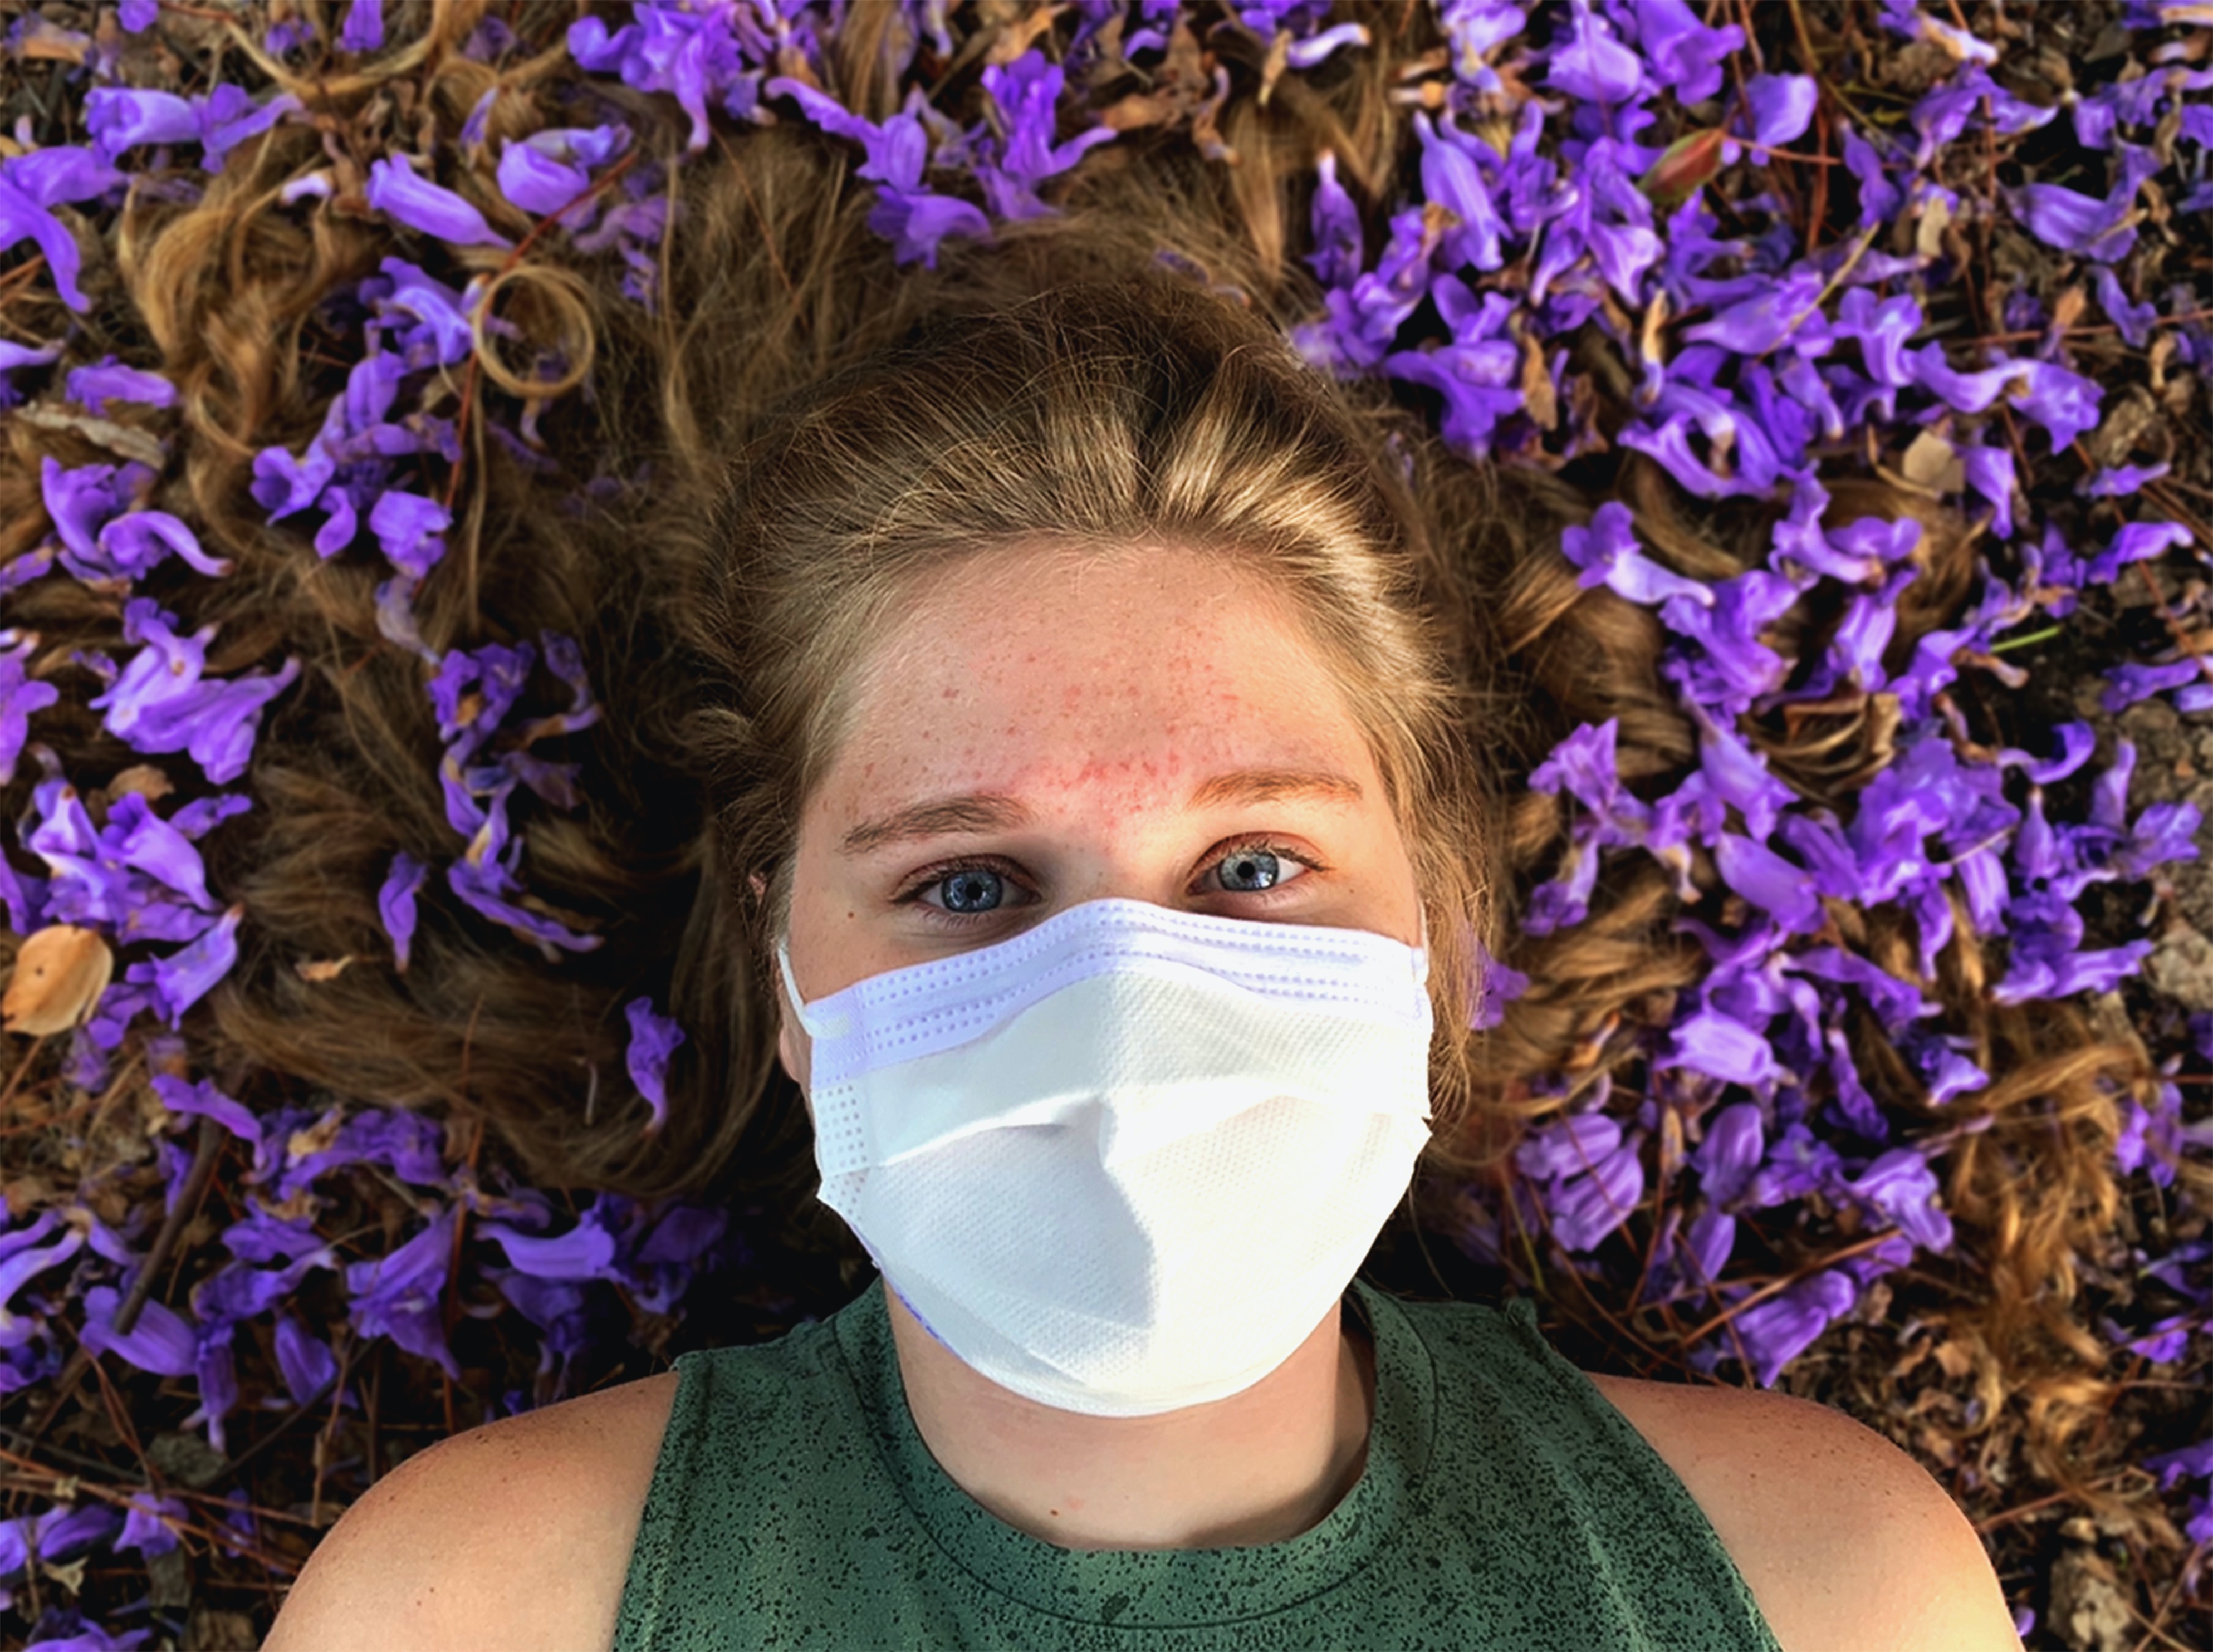 A young woman laying in a field of purple flowers with her hair splayed out around her head. She is wearing a sleeveless moss green top and a white medical mask. 